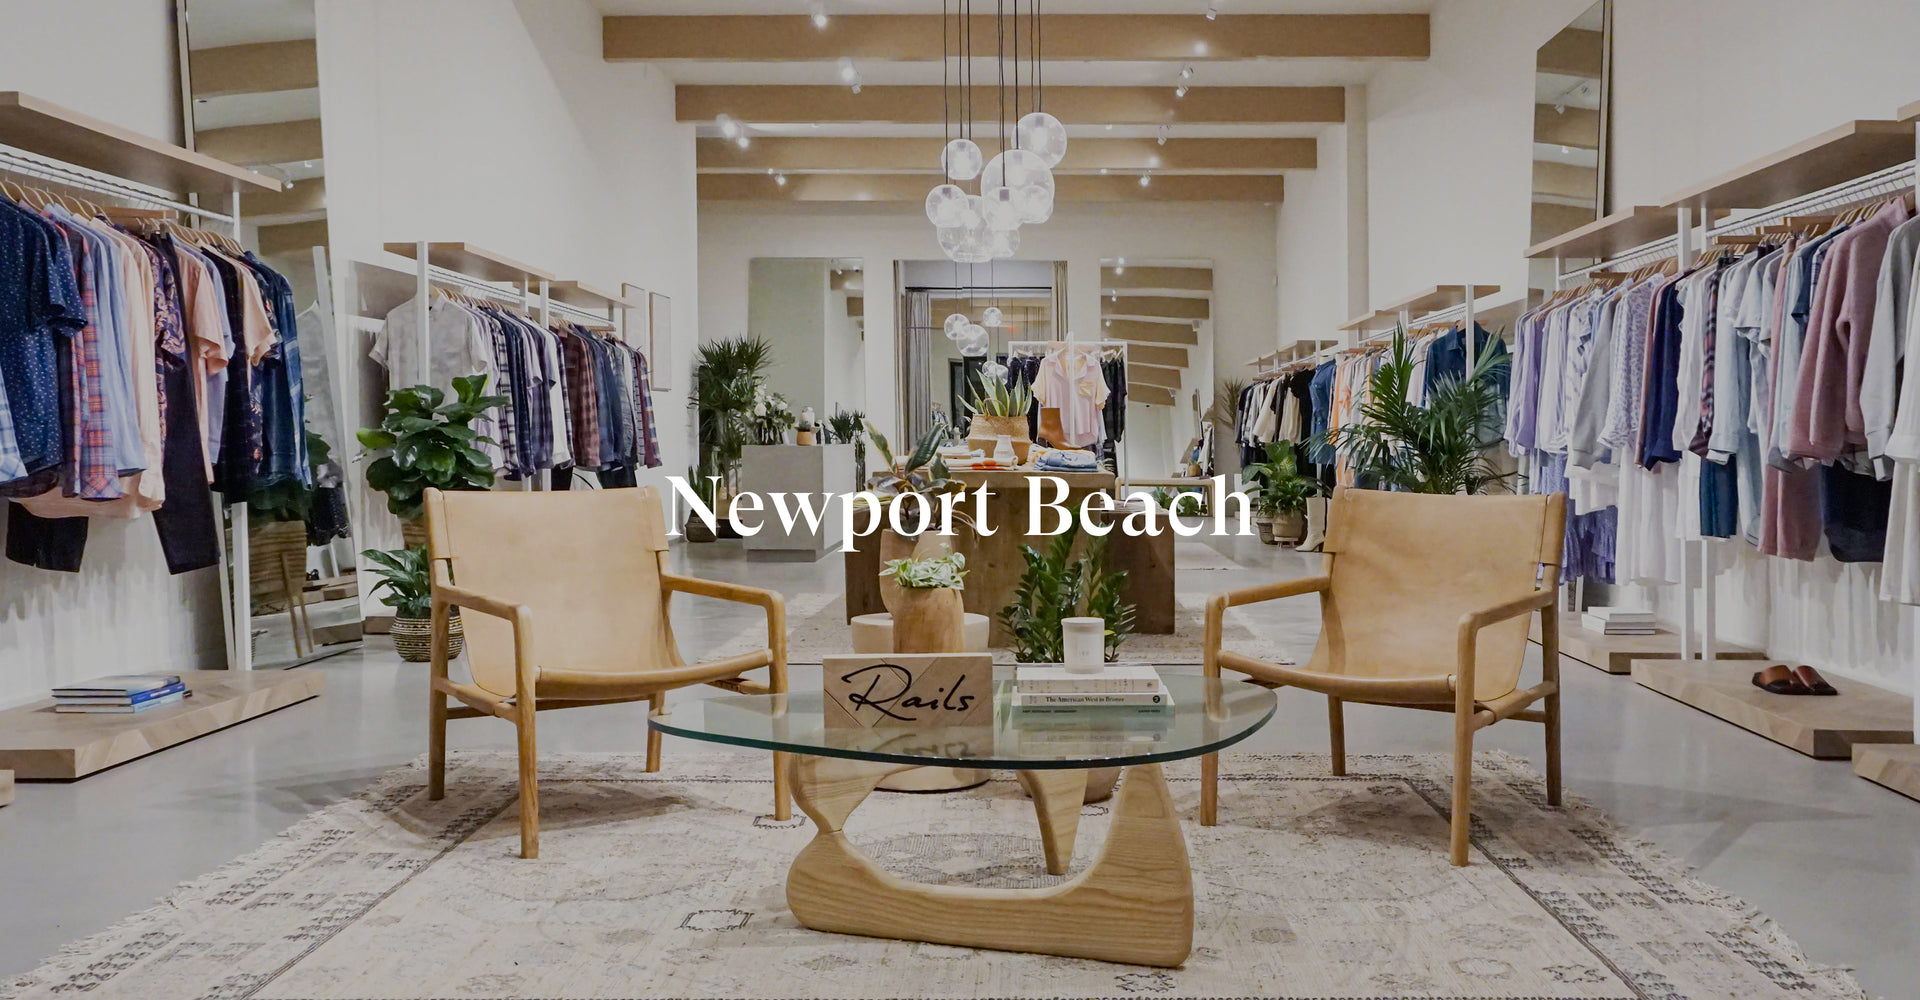 IMAGE SHOWS INSIDE OF NEW BEACH STORE